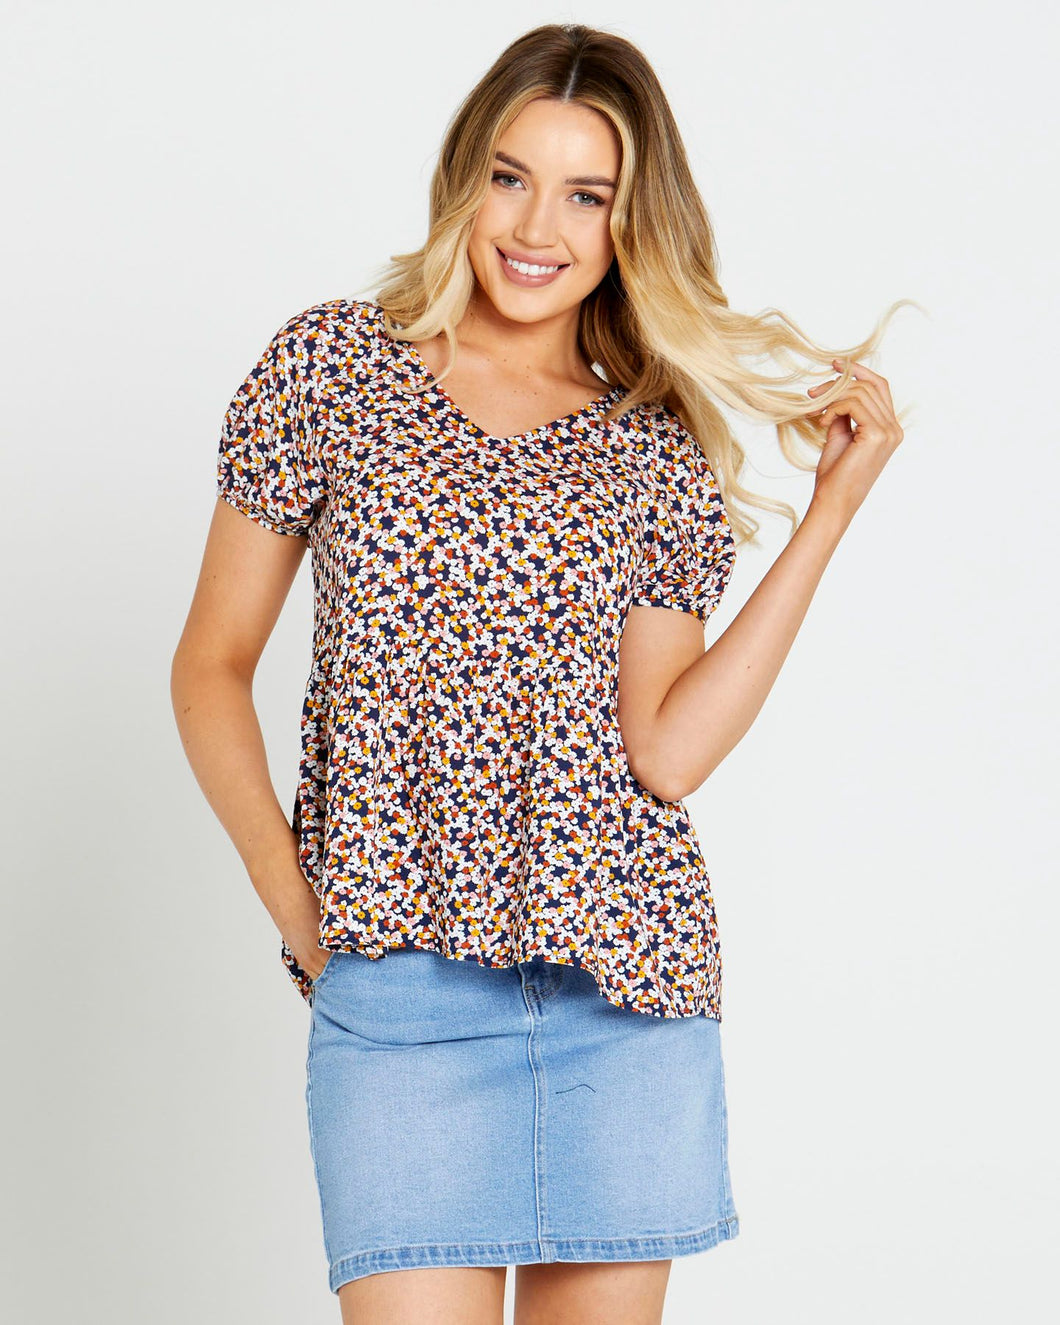 Isobelle Tiered Top - Navy Floral